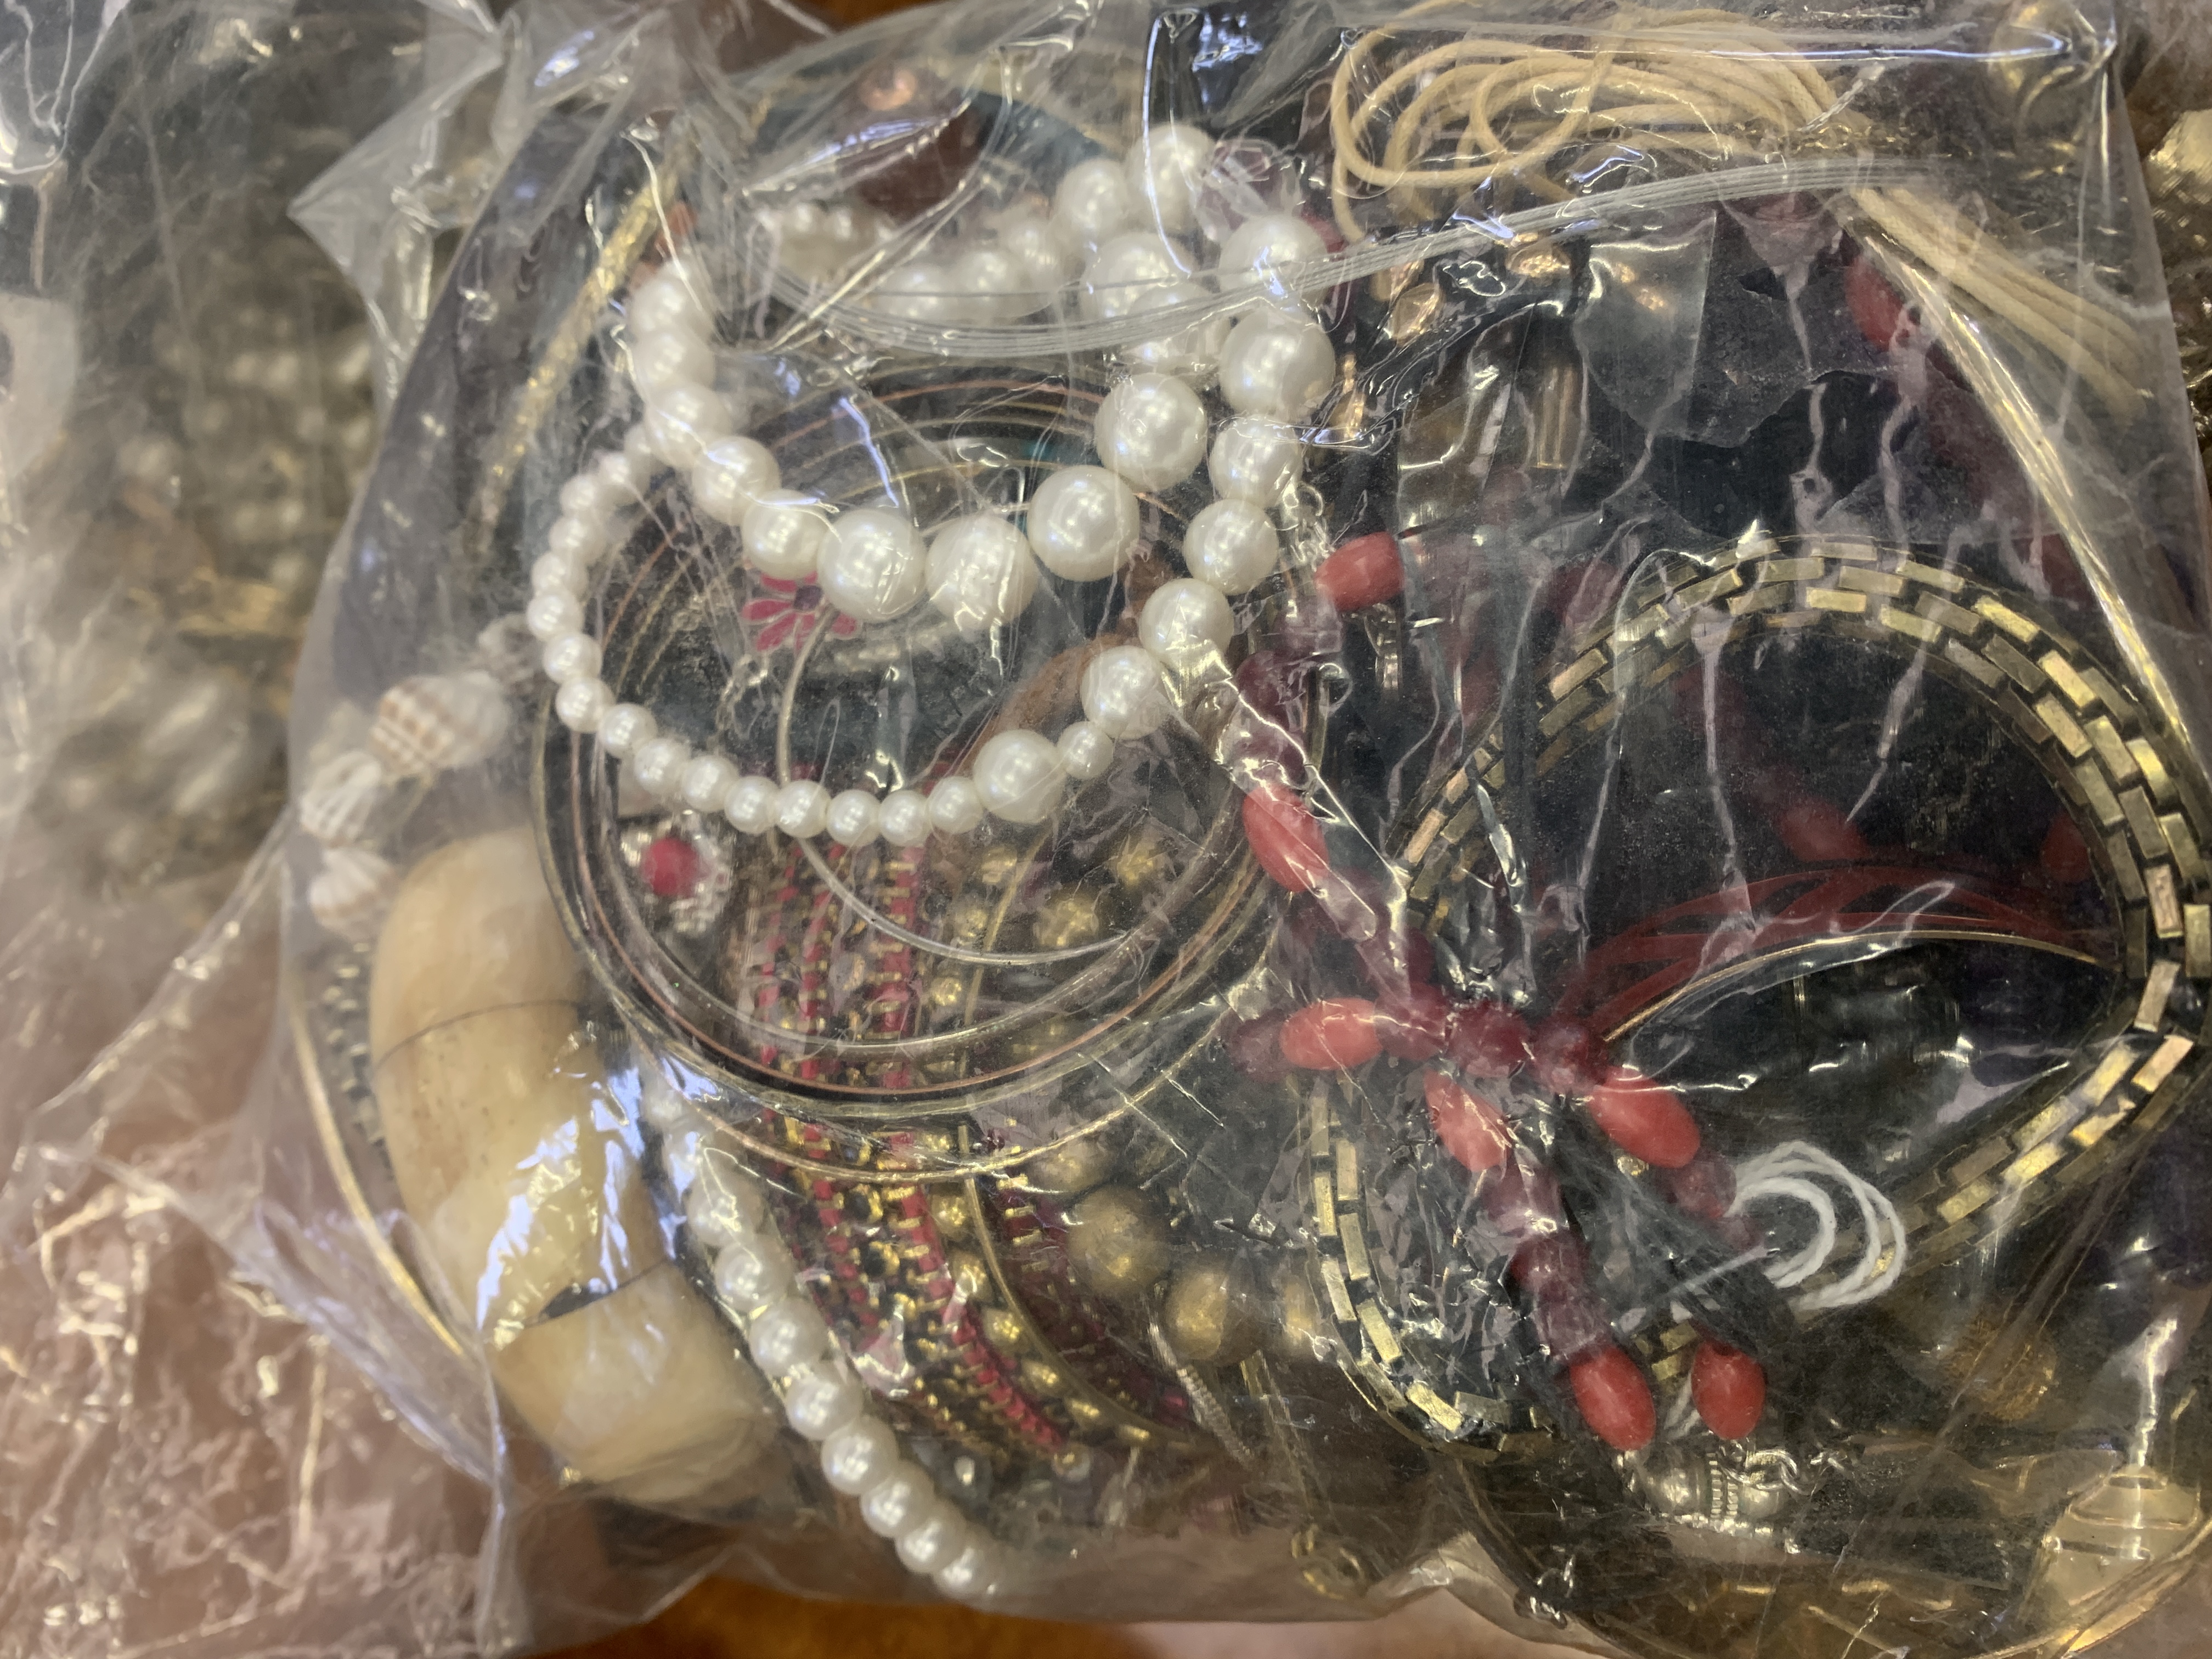 Three bags of costume jewellery and watches